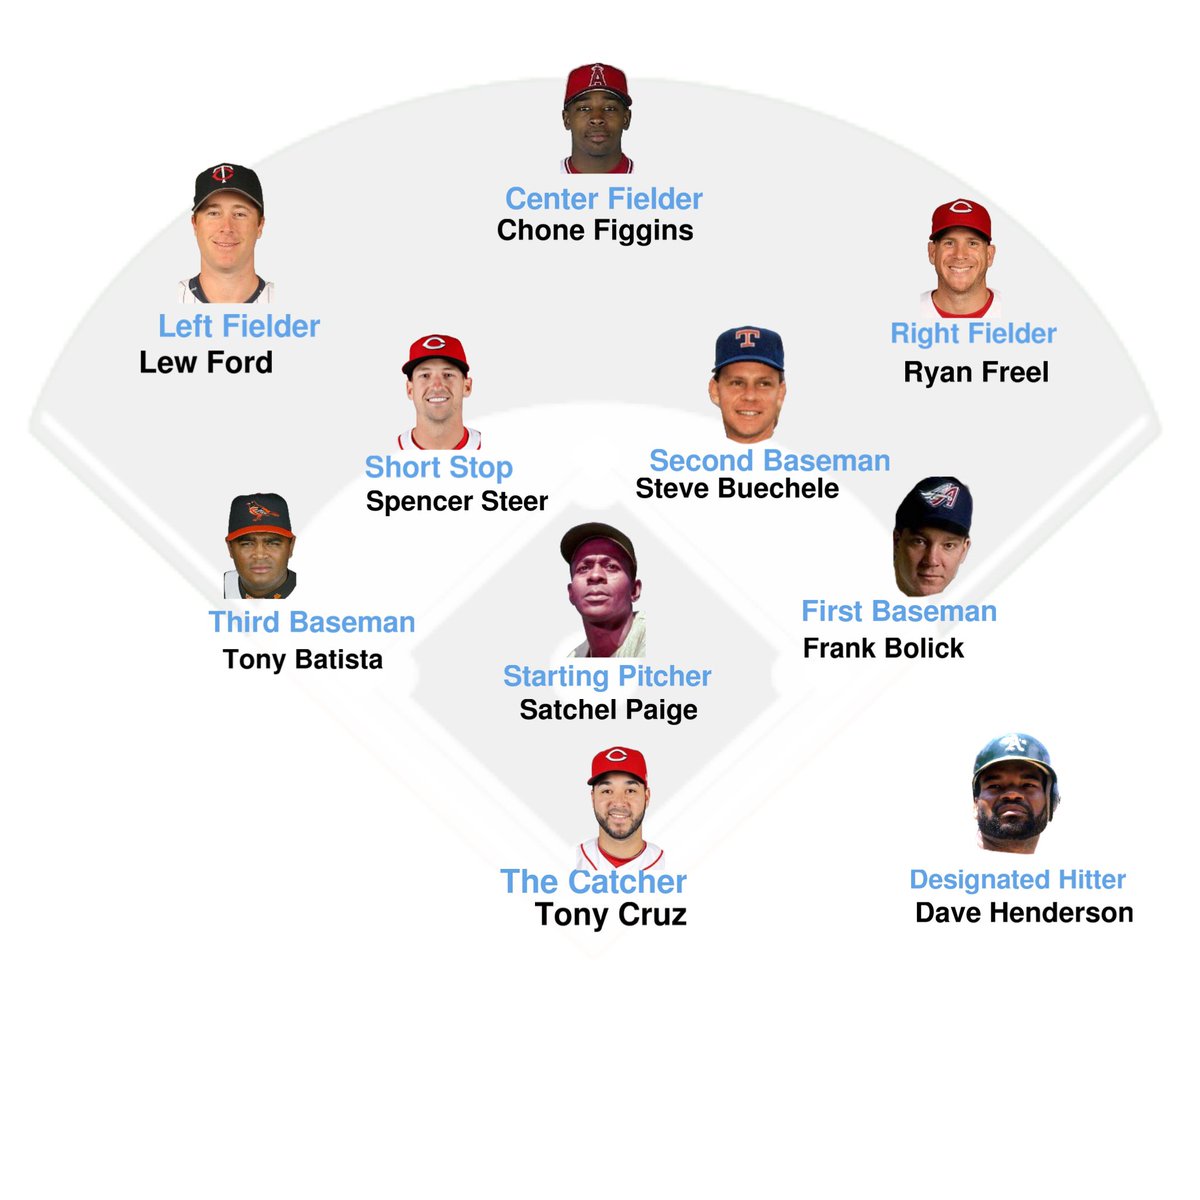 here is a lineup in which every player has the same initials as his position